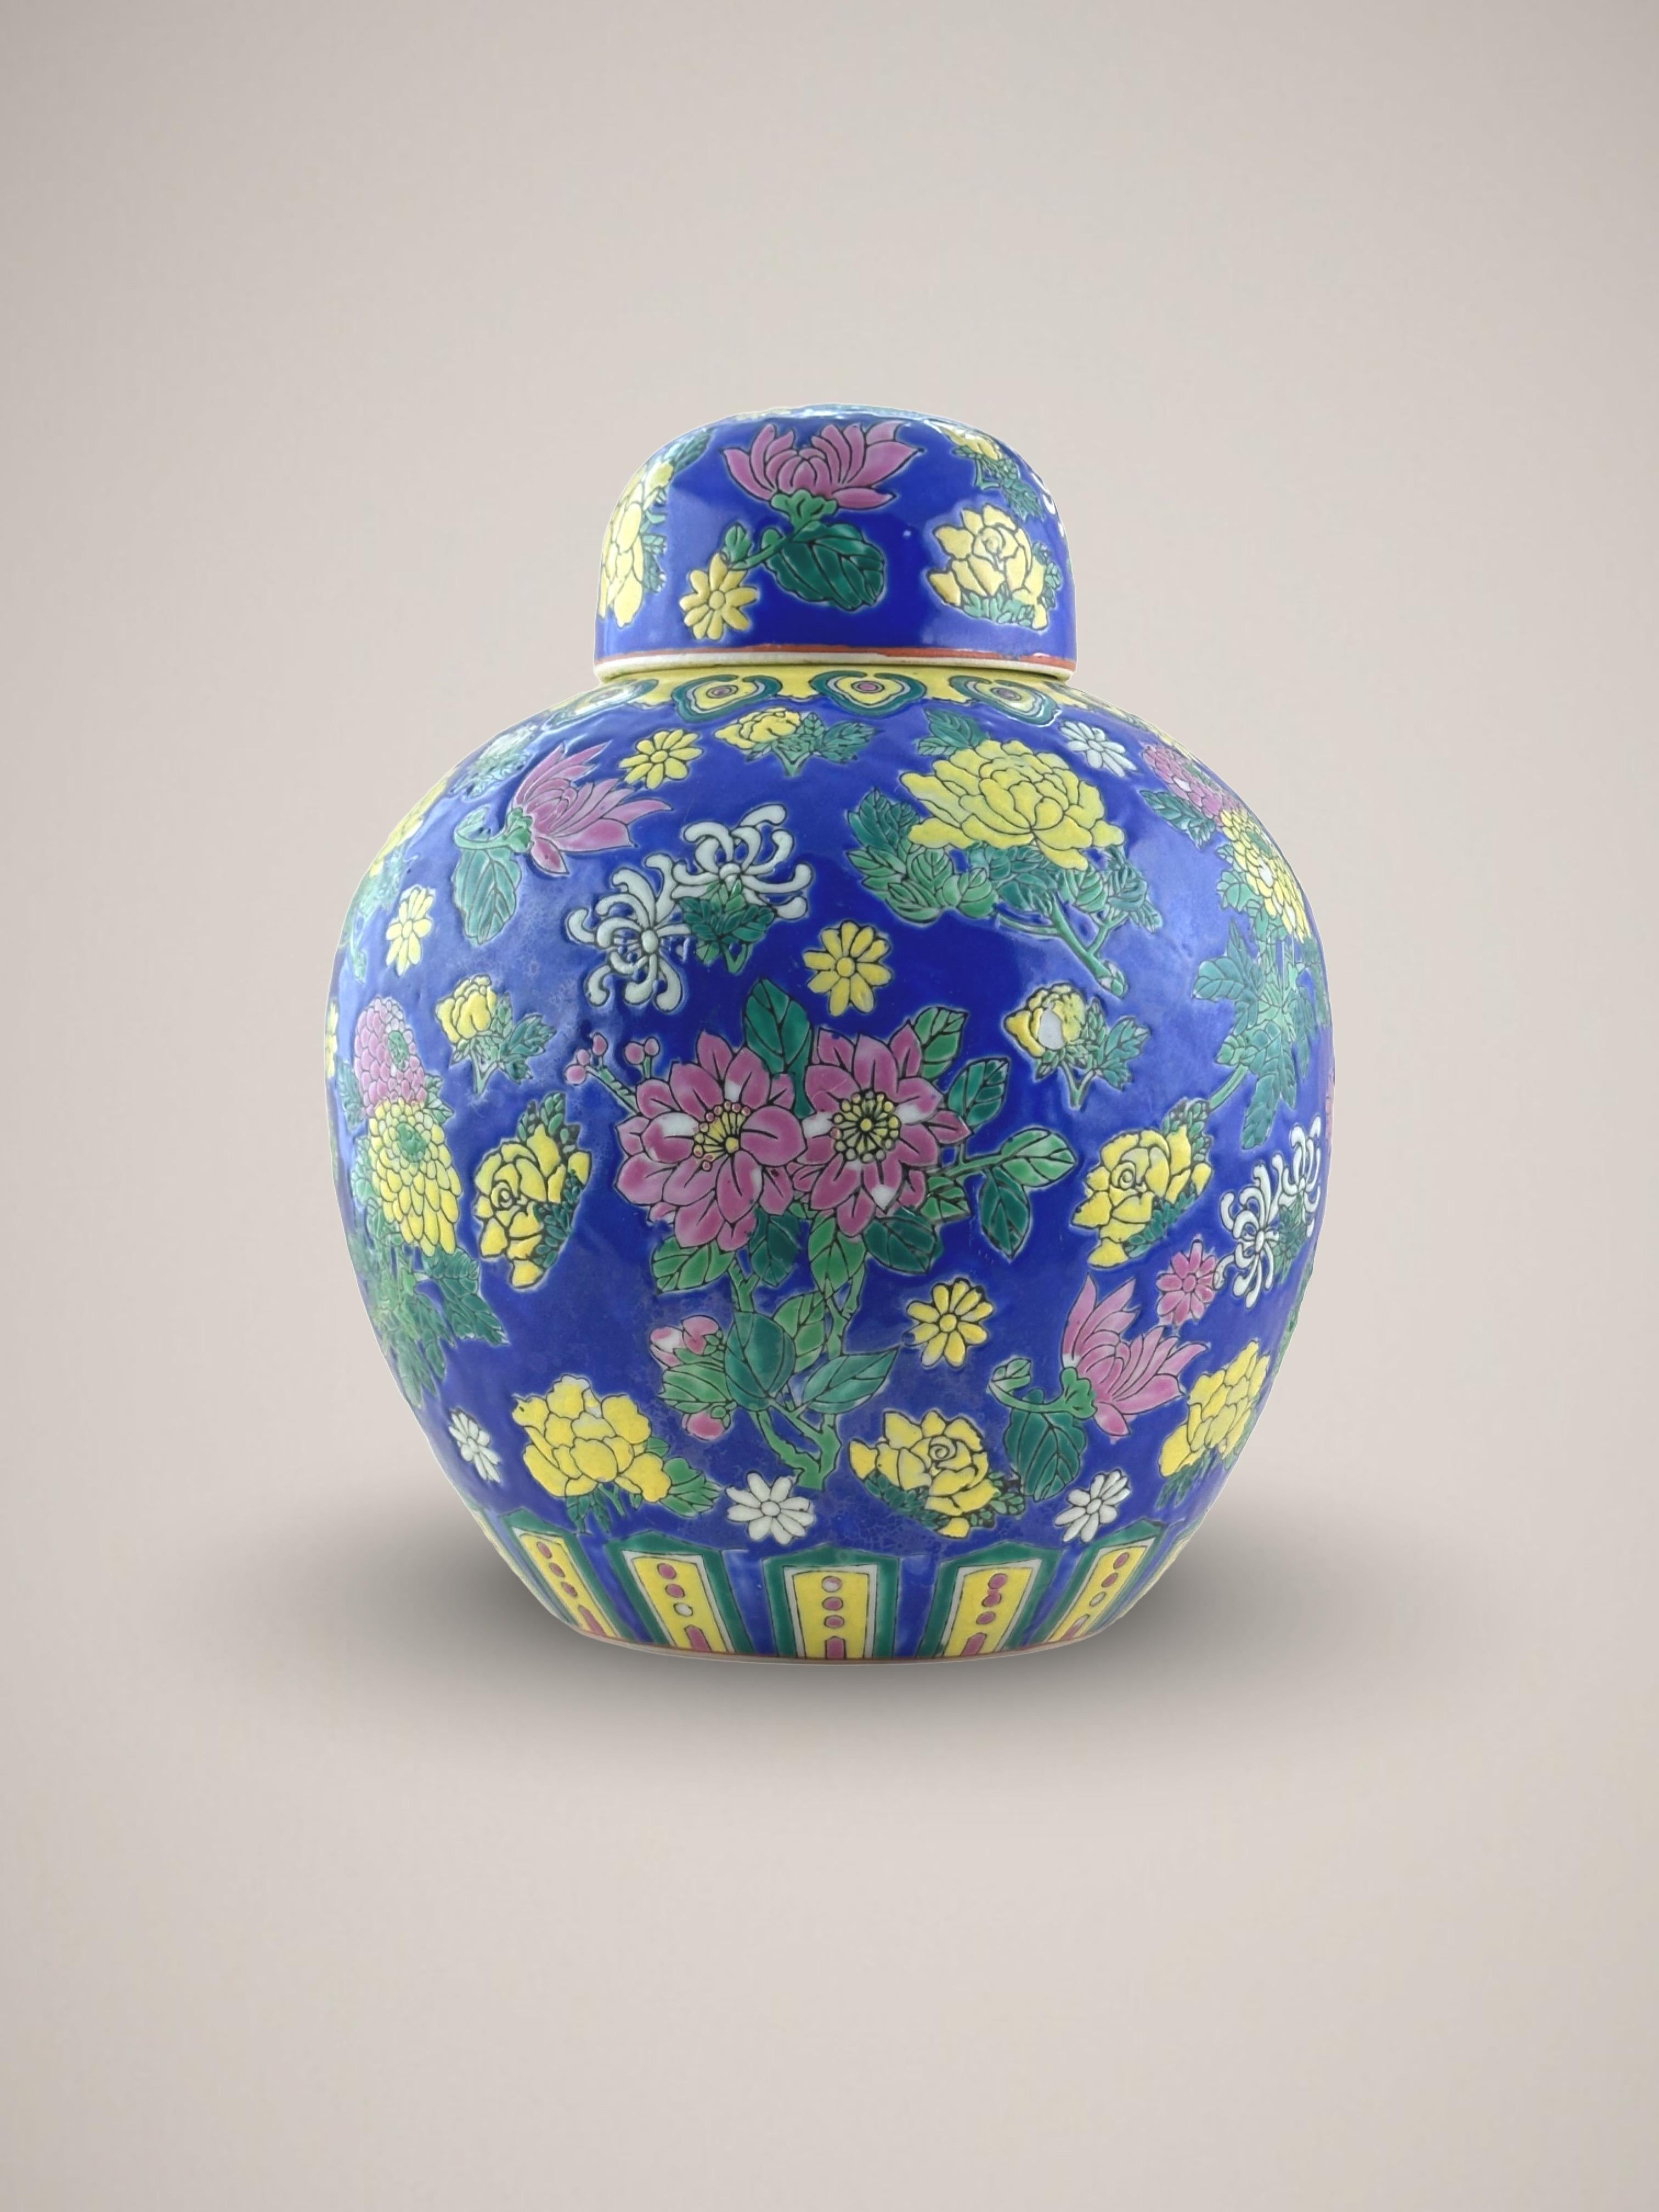 A large vintage 'Straits style' ginger jar. Crafted in China towards the latter half of the 20th Century, around the 1970s

Handcrafted in fine Chinese porcelain and emboldened with a vivid palette of enamel tones. It is adorned with chrysanthemum